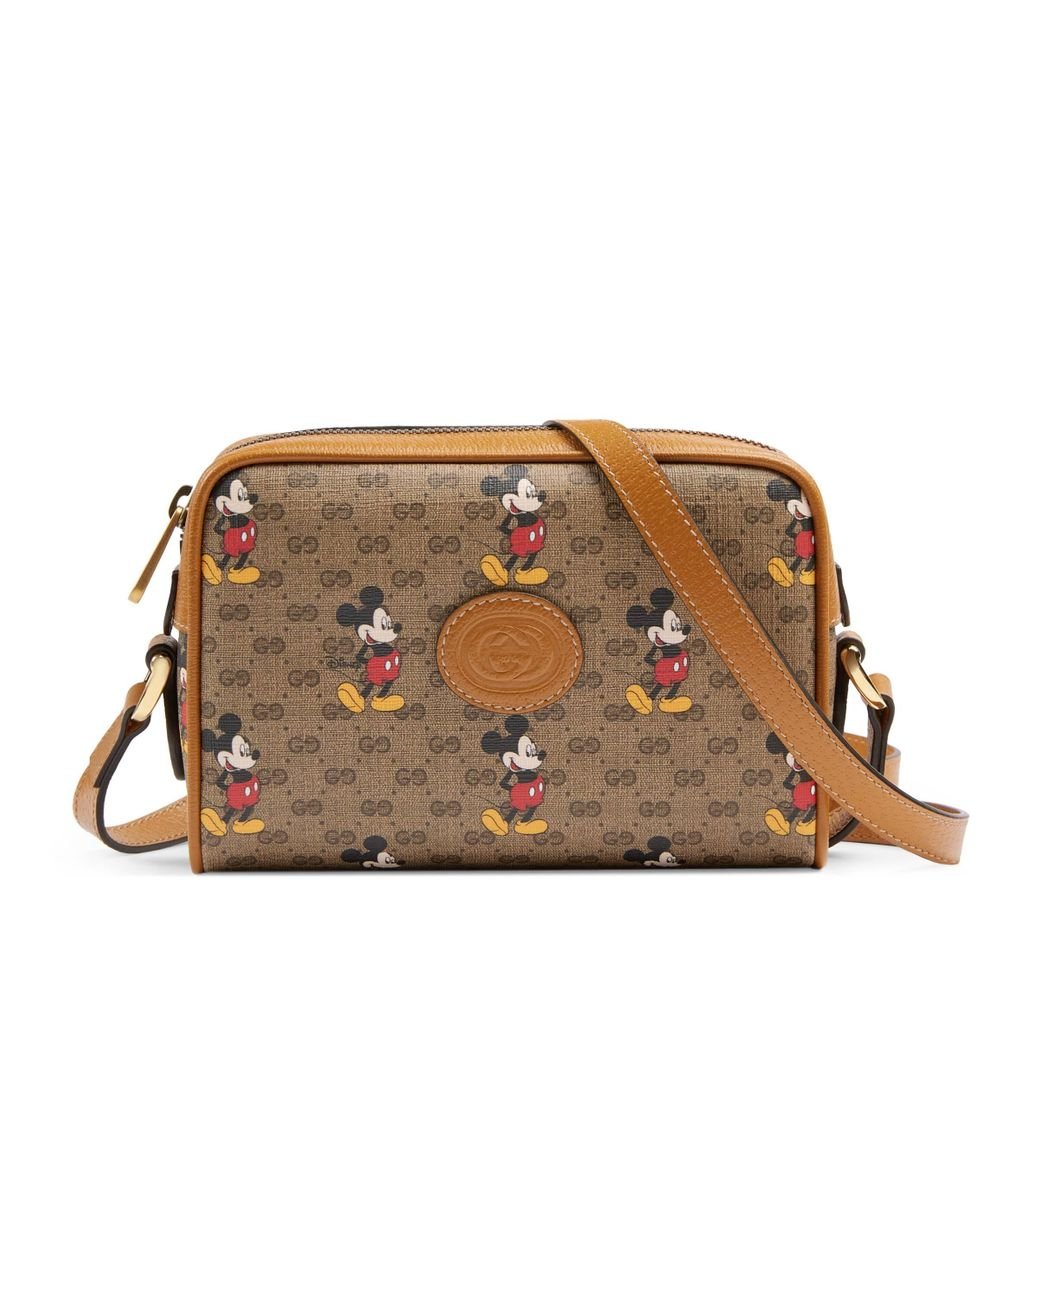 Gucci x Disney Mickey Mouse Print Canvas Leather Bucket Shoulder